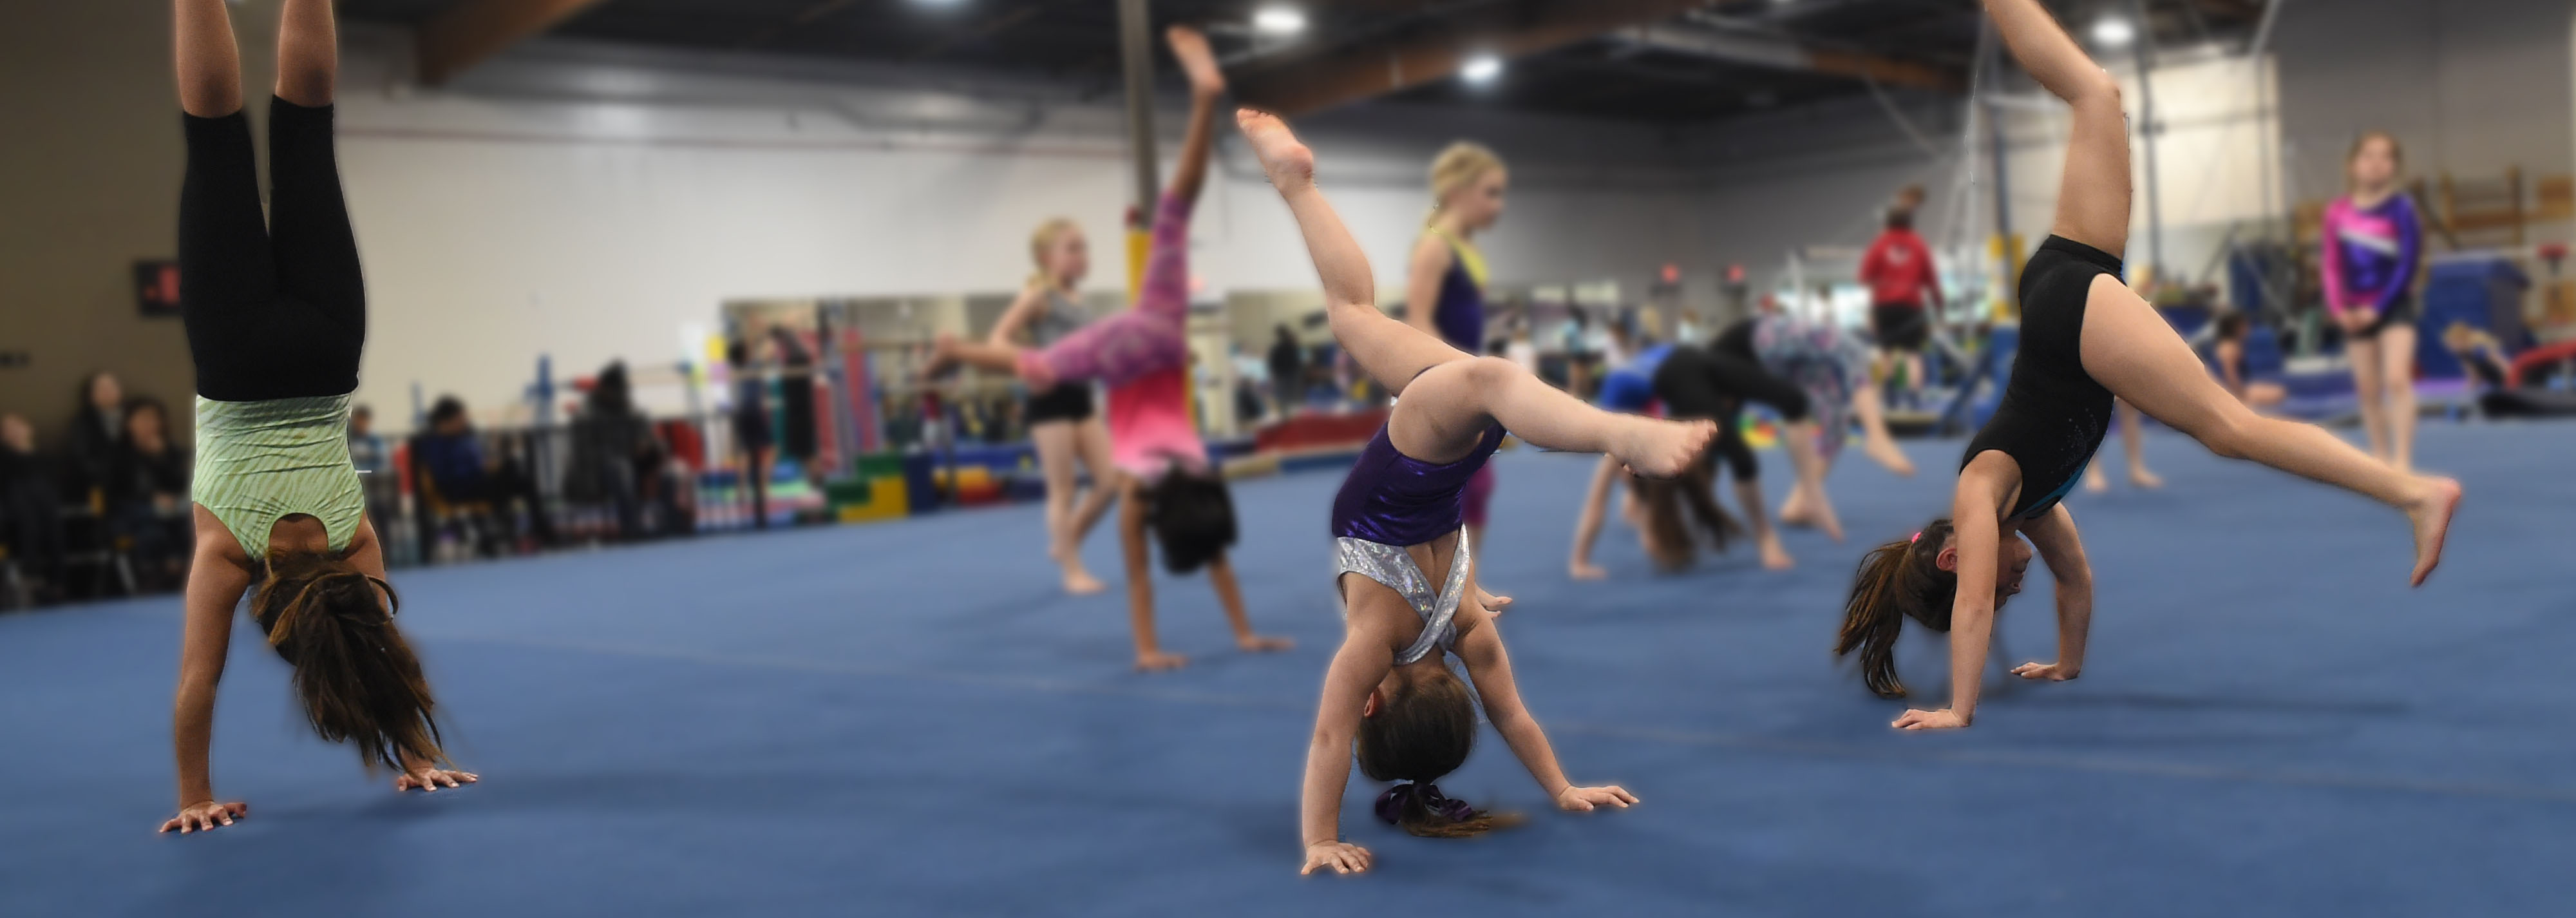 free gymnastics classes for toddlers near me